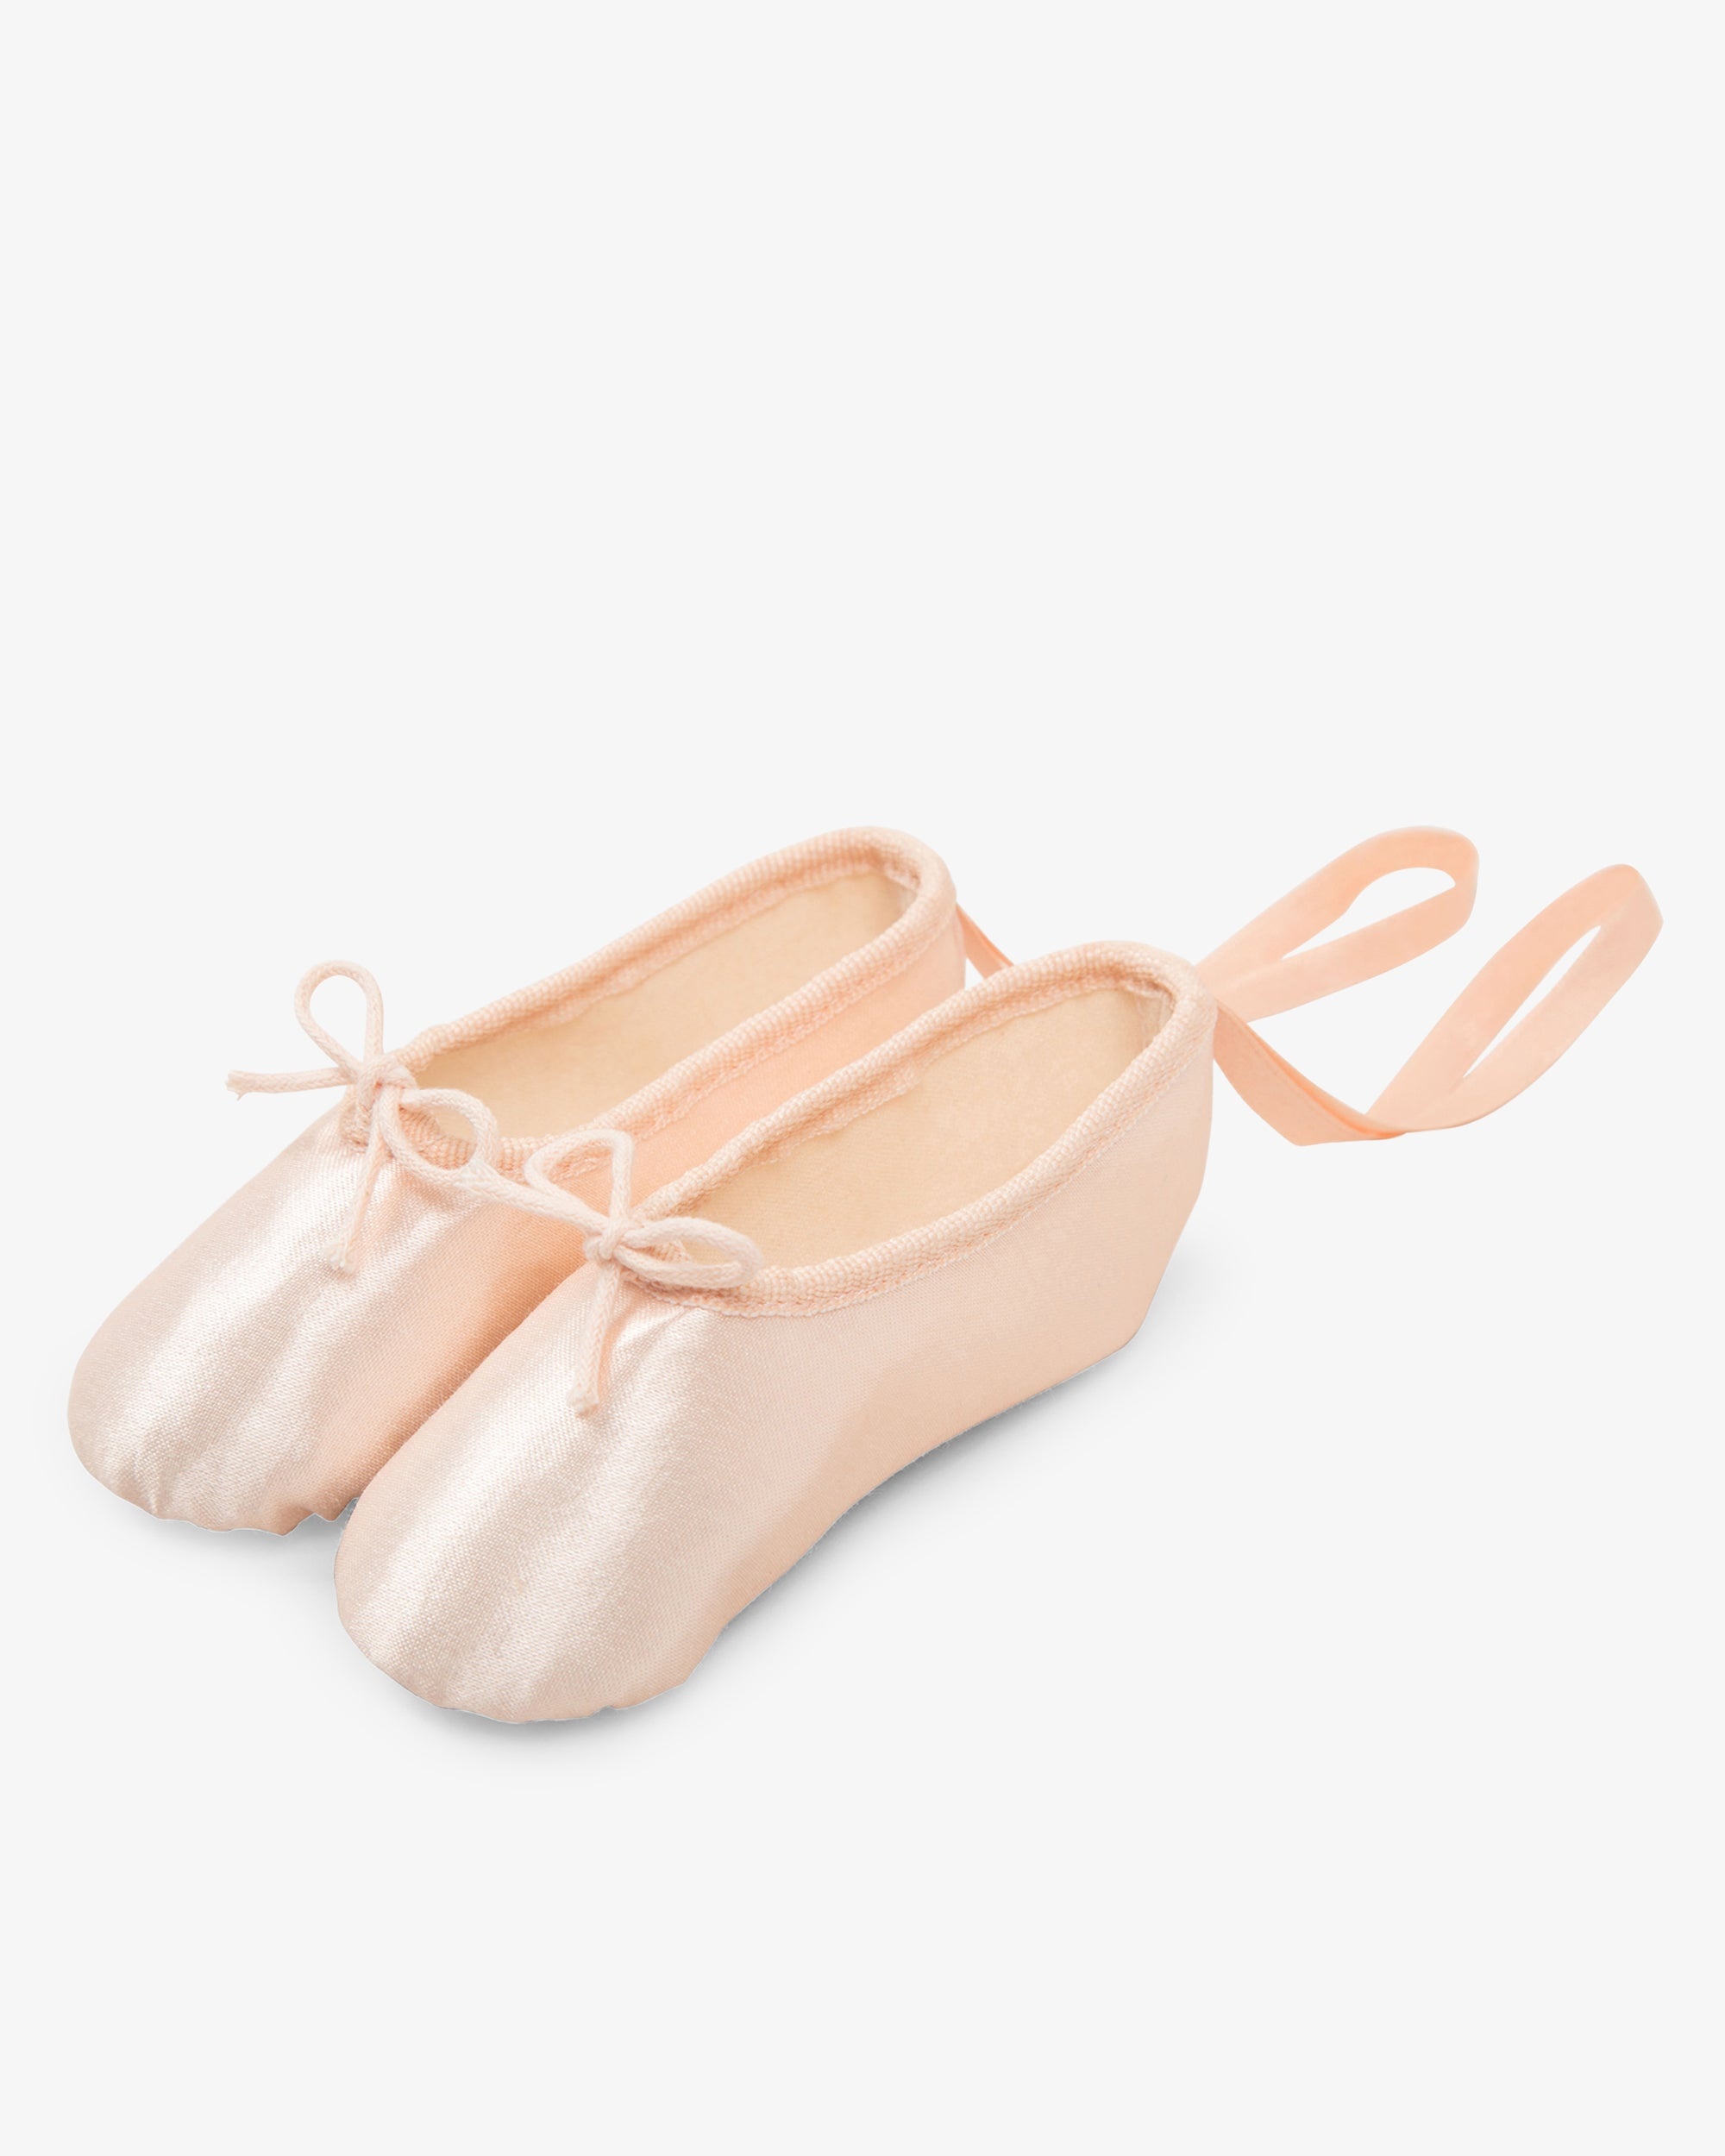 LUCKY CHARMS BALLET SHOES - 2